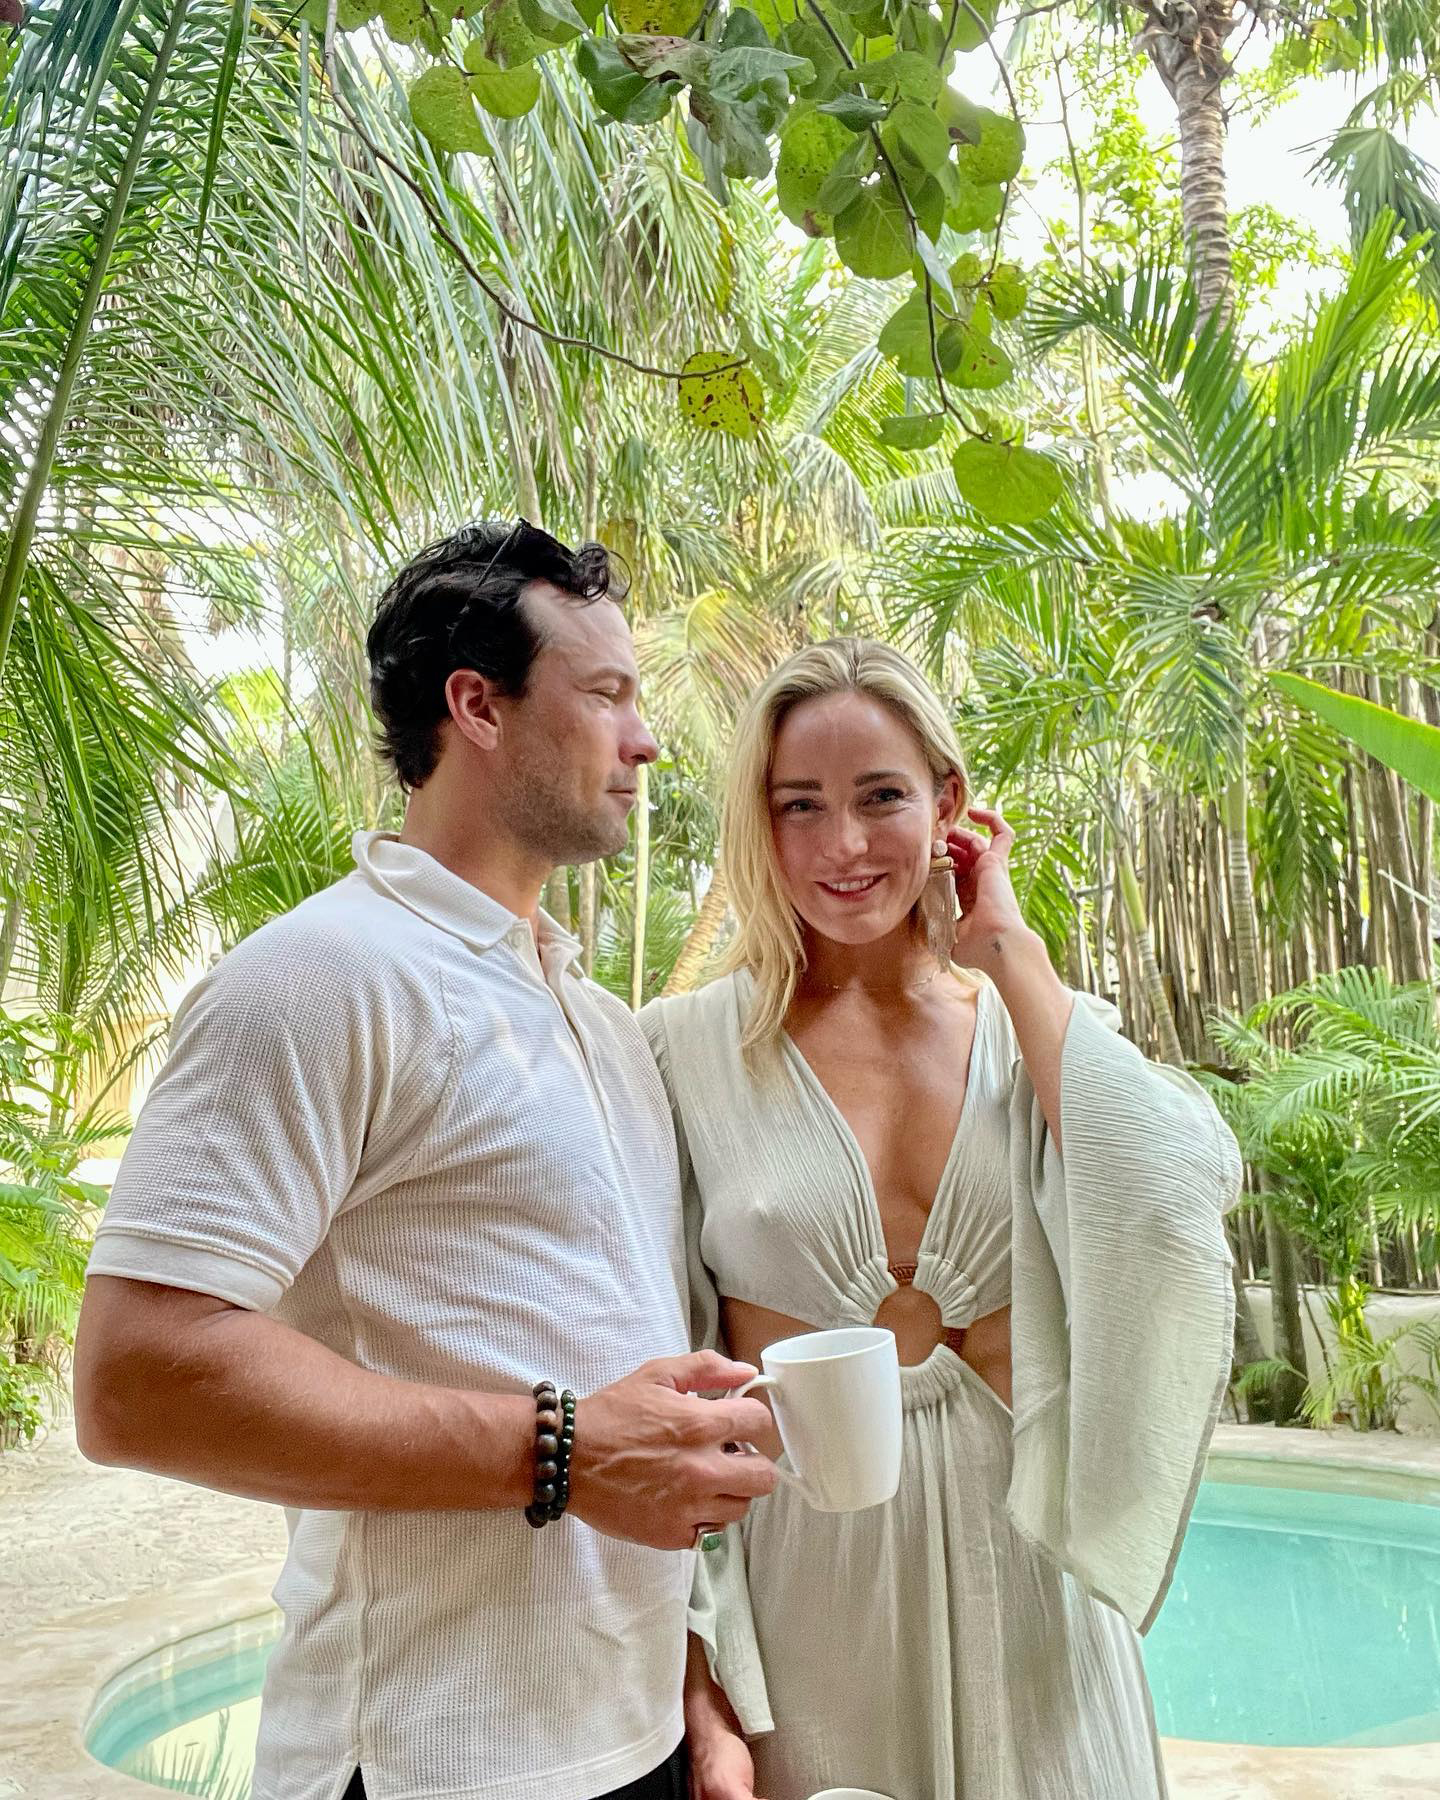 She Said Yes! Legends of Tomorrow's Caity Lotz Is Engaged to Kyle Schmid